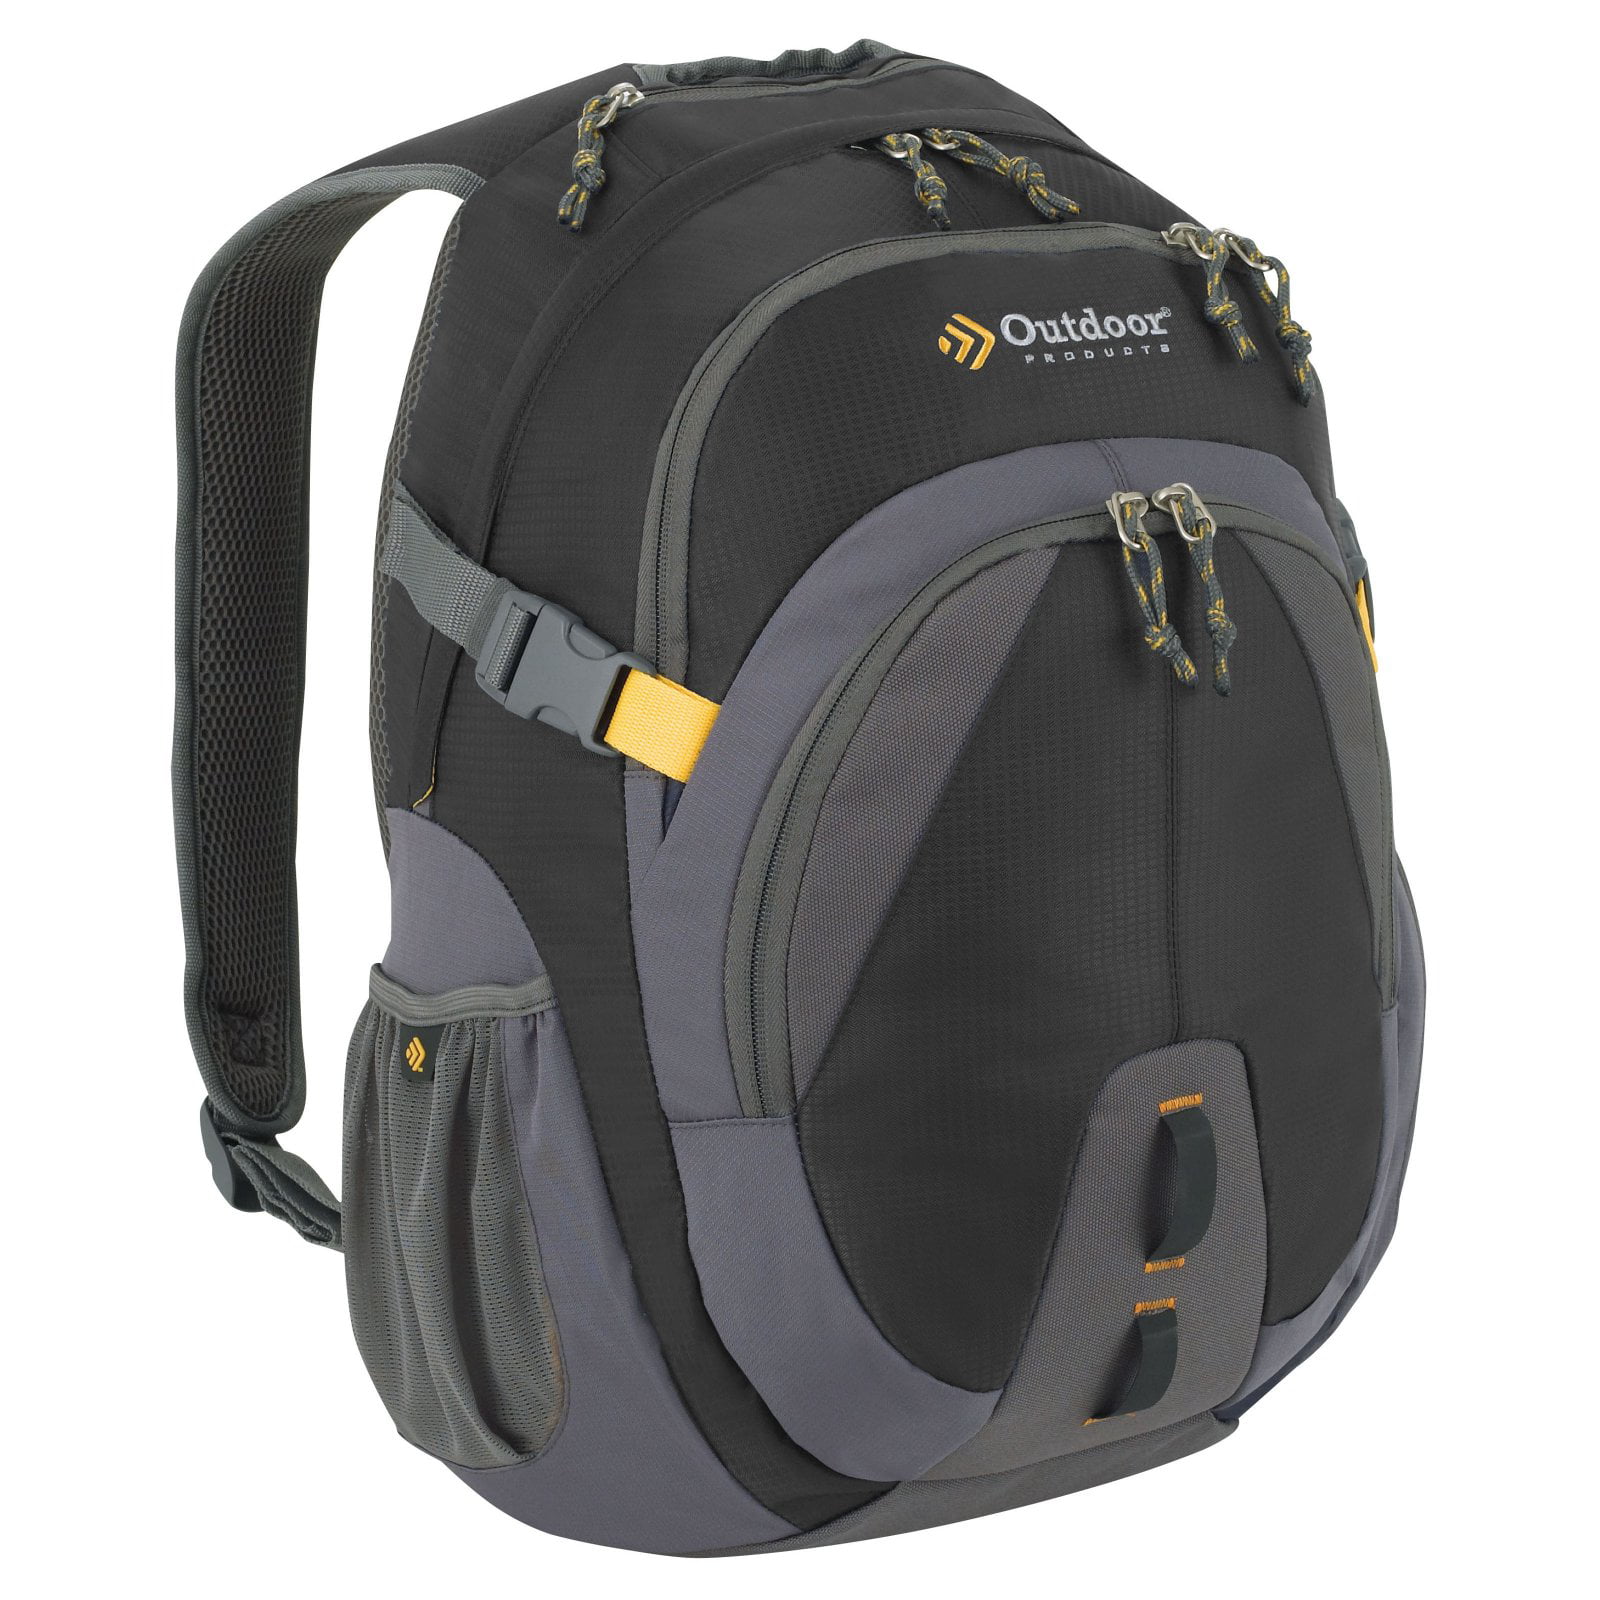 Outdoor Products - Outdoor Products Bam Backpack - Walmart.com